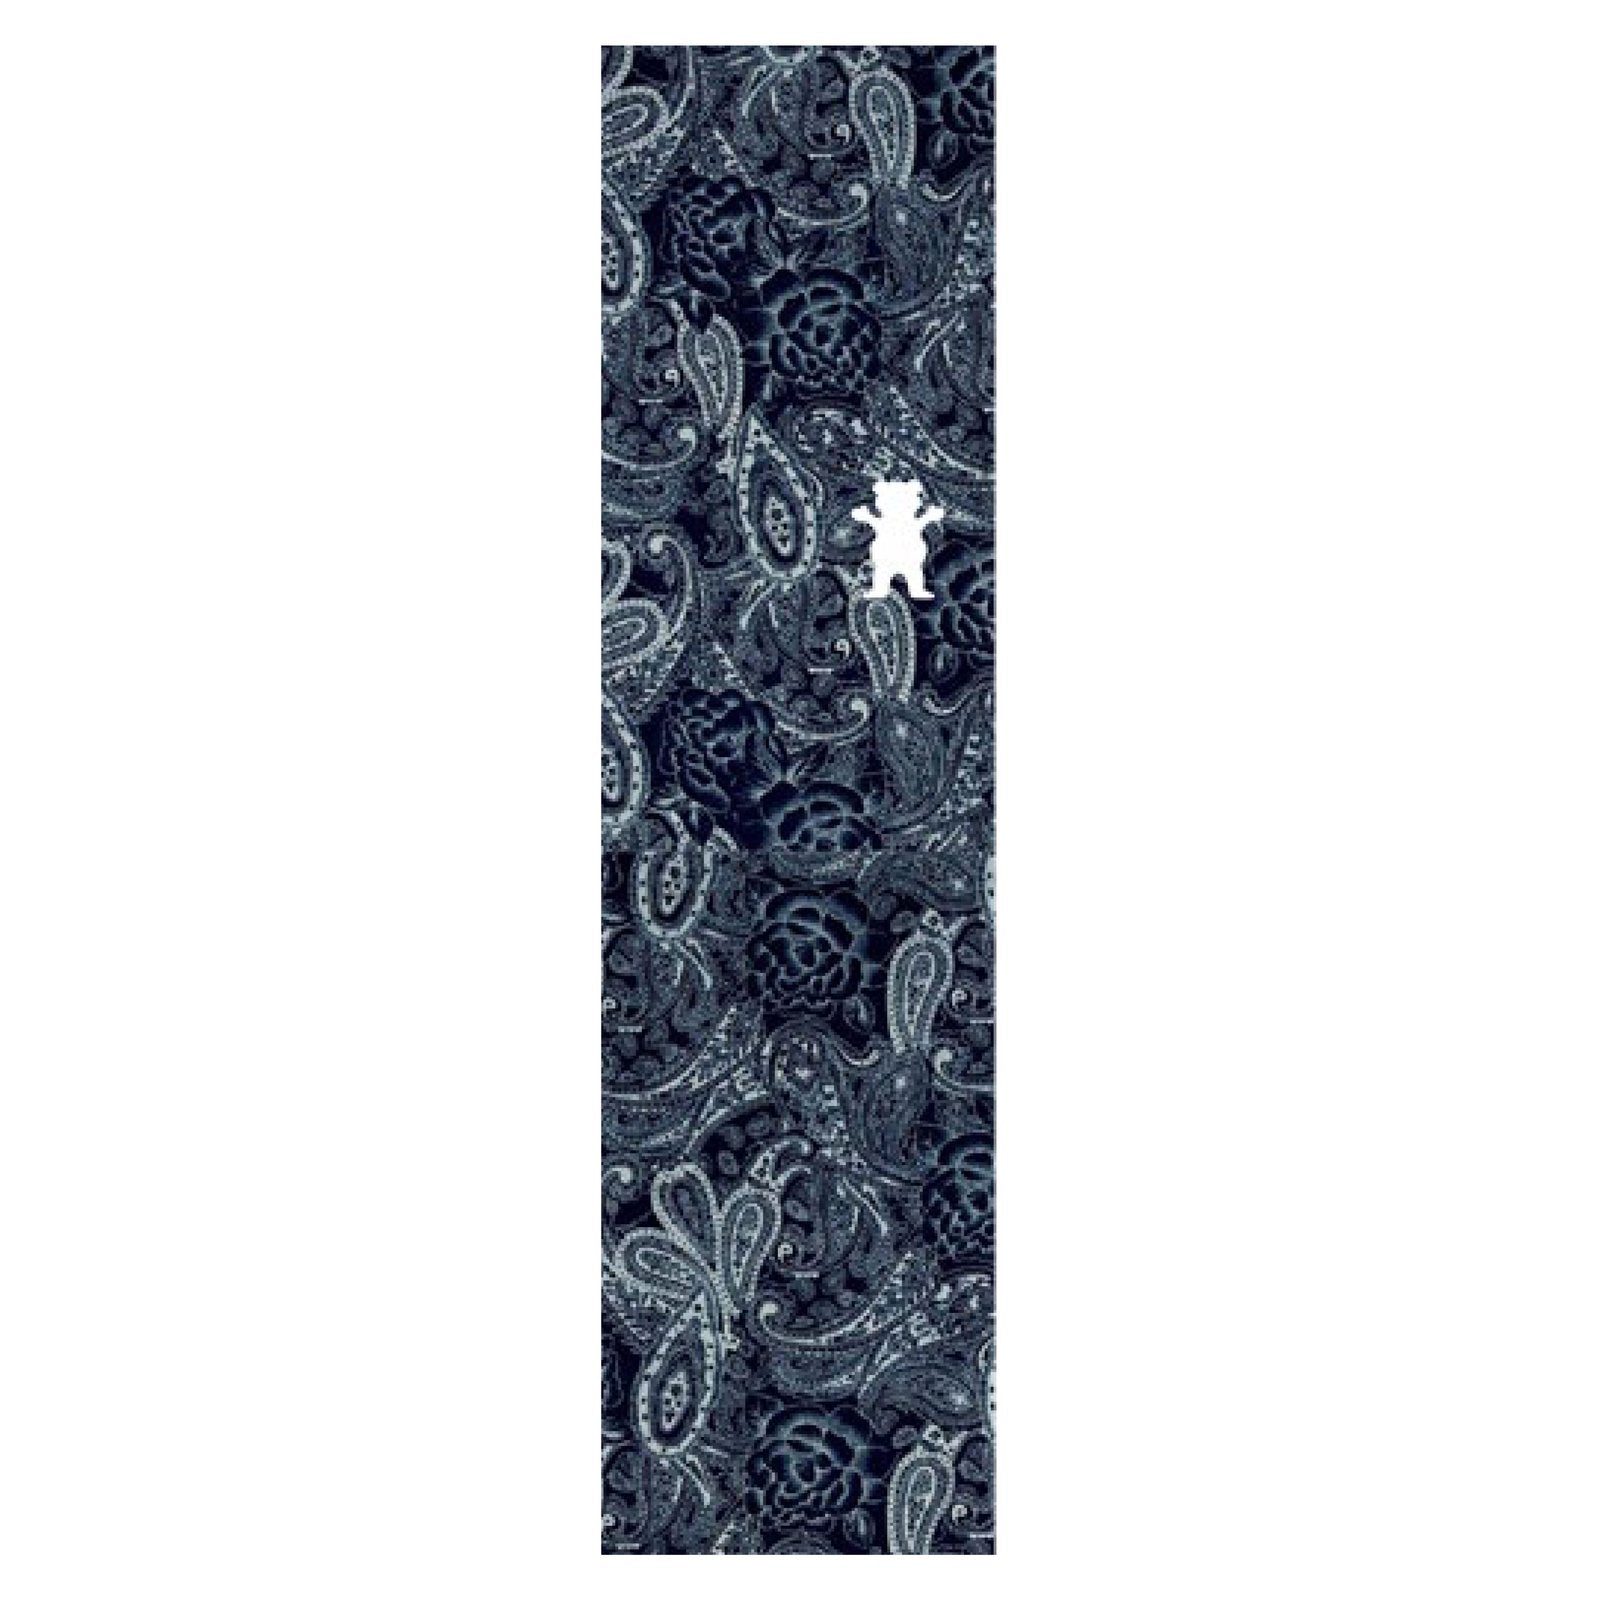 Paisley OG Beat Cut Out Grizzly Skateboard Grip tape